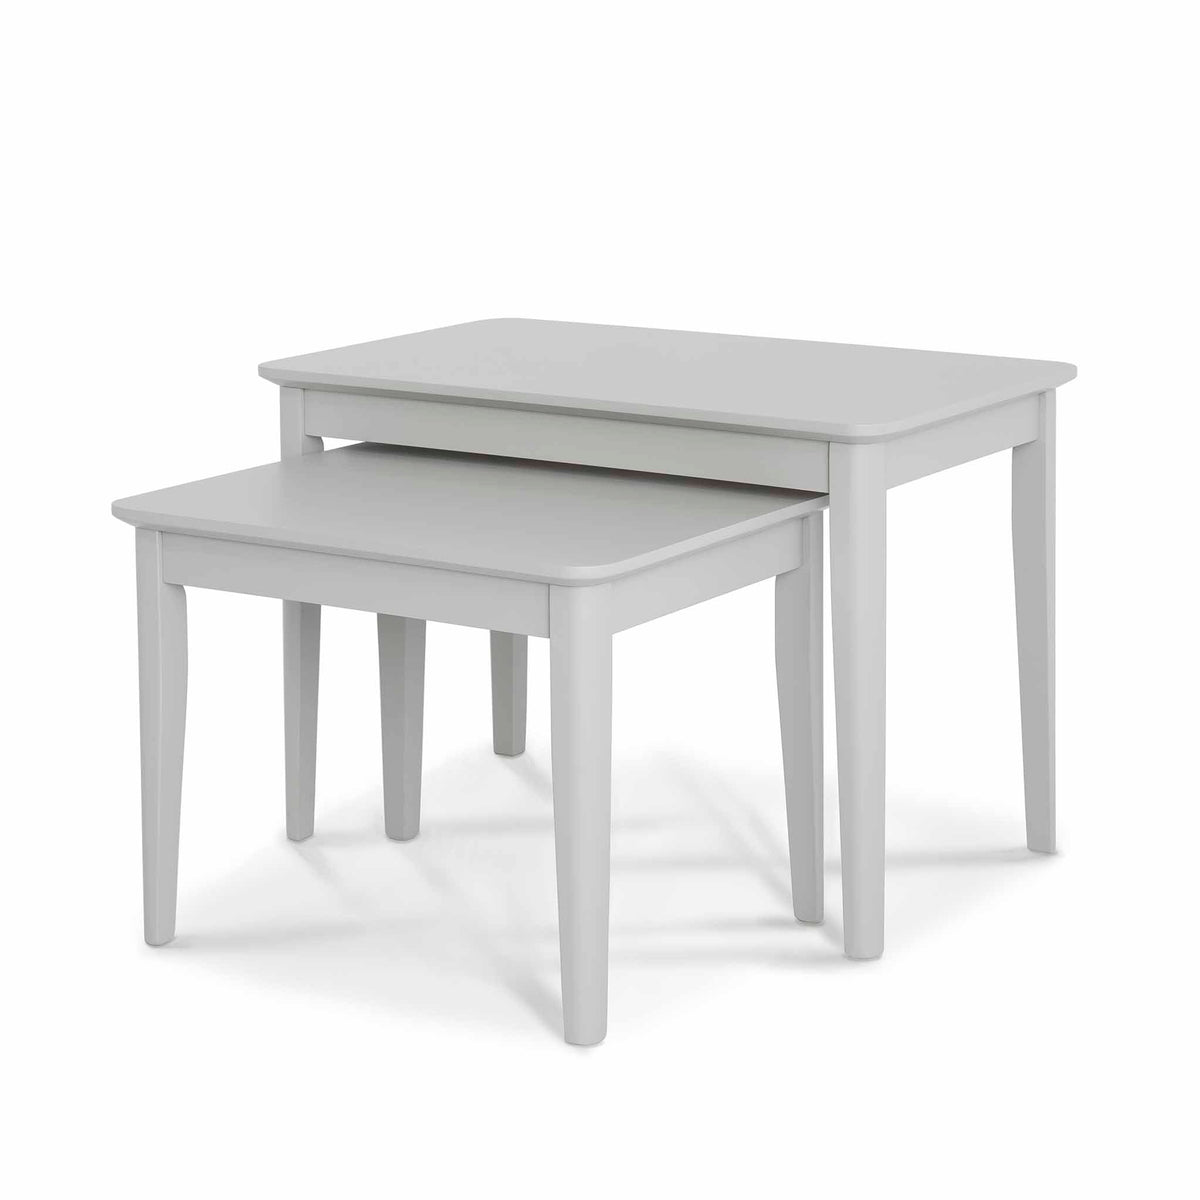 Elgin Grey Nest of Tables - Side view with smaller table pulled out